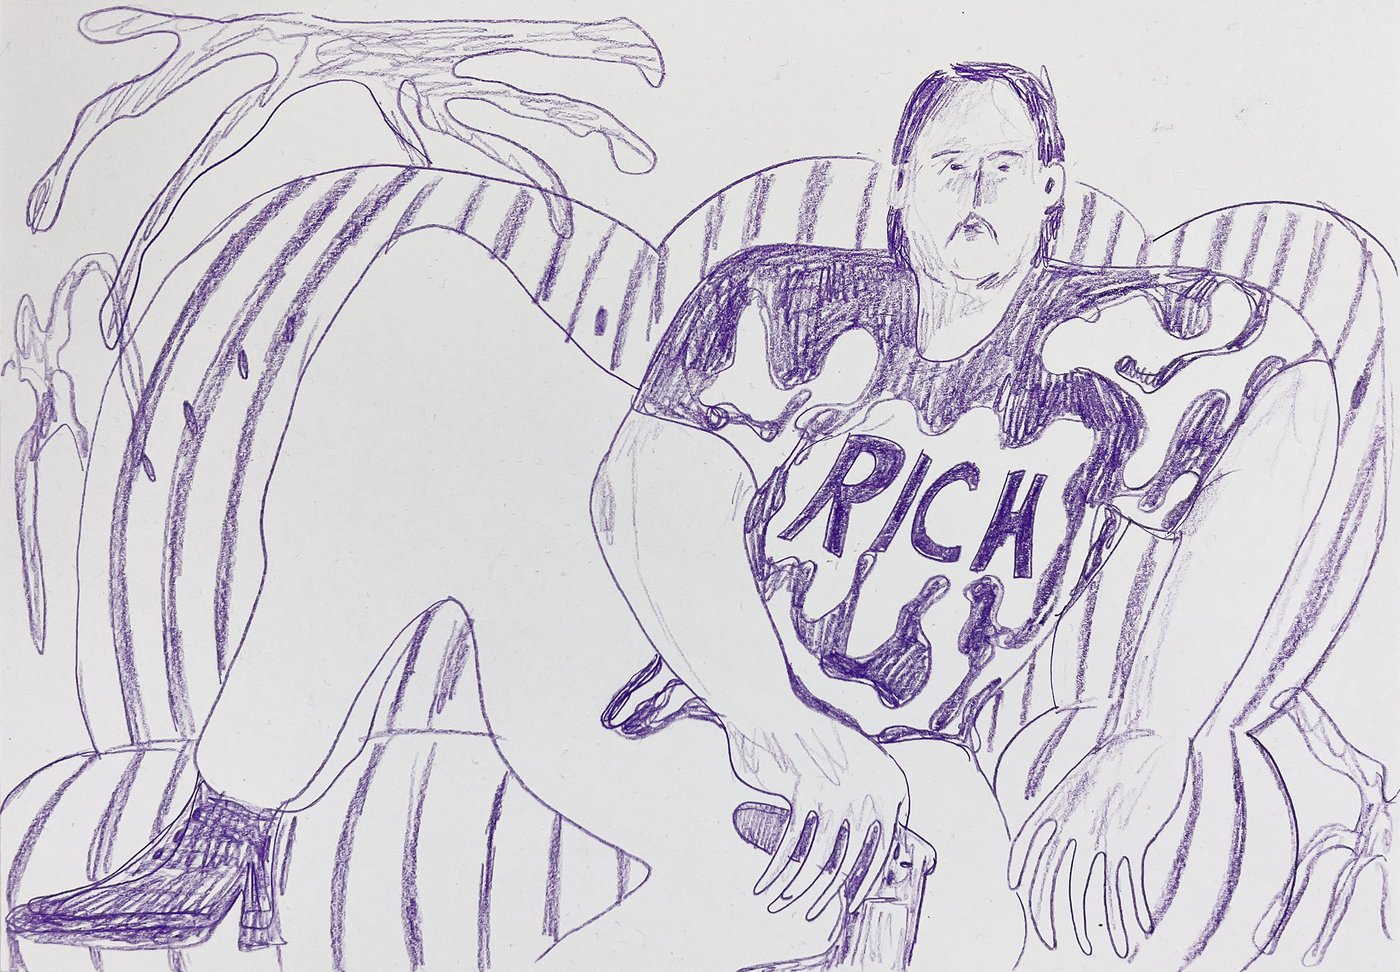 The landscape-format color-pencil drawing shows a man lying on a comfortable sofa. He is holding a computer gaming console in his right hand, while propping himself up with his left. His gaze is focused on a point slightly right of the viewer. He wears a T shirt that has “rich” written on it. A potted plant is discernible in the background.